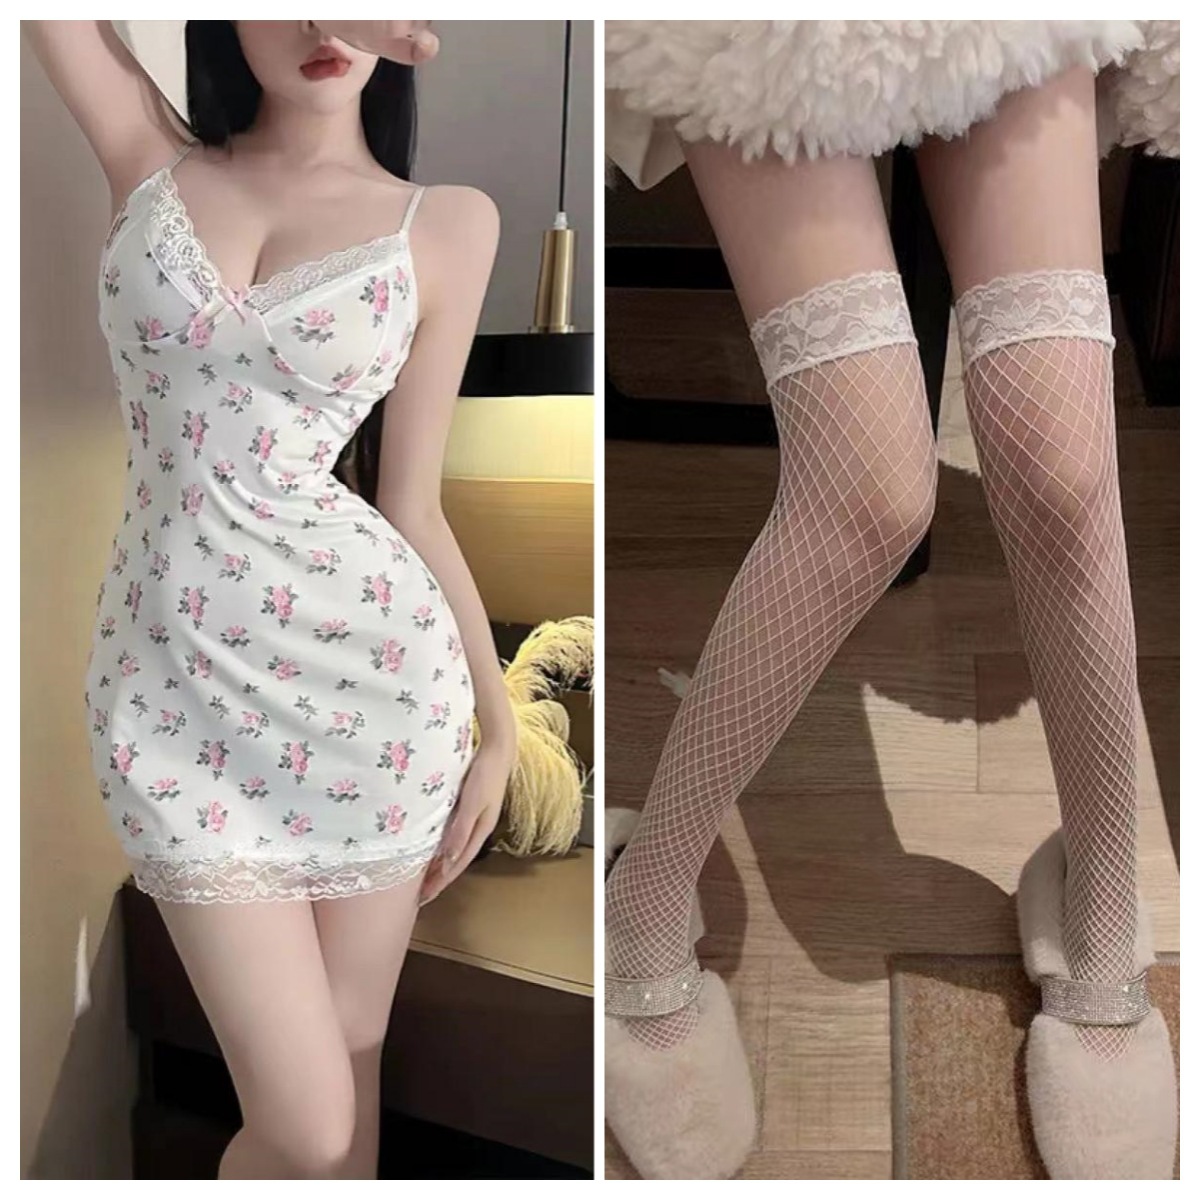 Sexy Lingerie Sexy Pure Desire Floral Slip Dress plus Size Lace Nightdress Can Go out Bed Teasing Seduction Pajamas